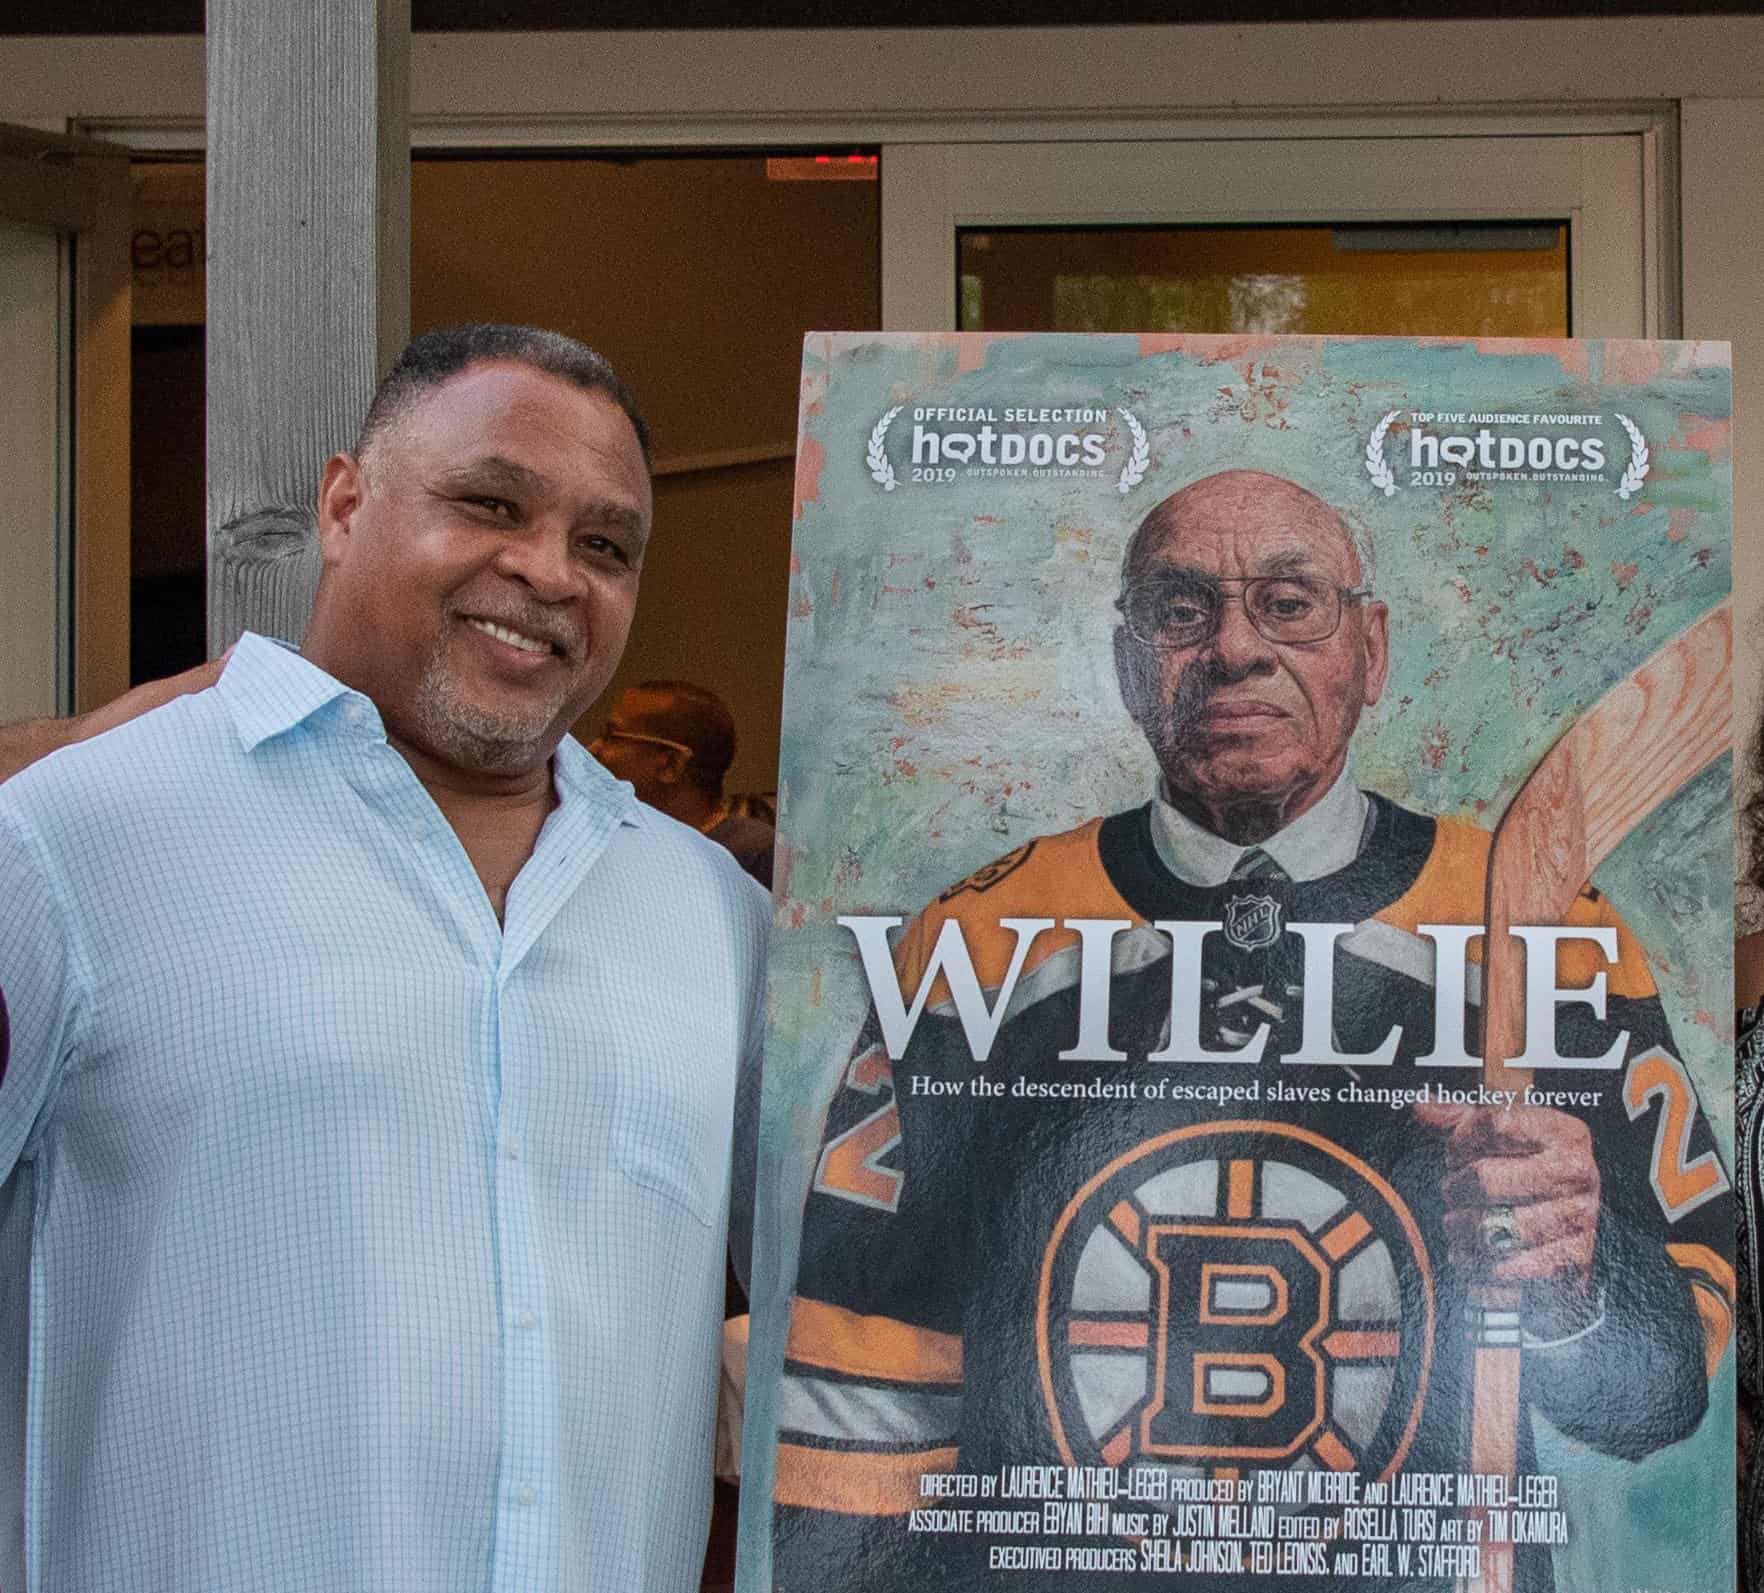 Willie O'Ree, Biography & Facts